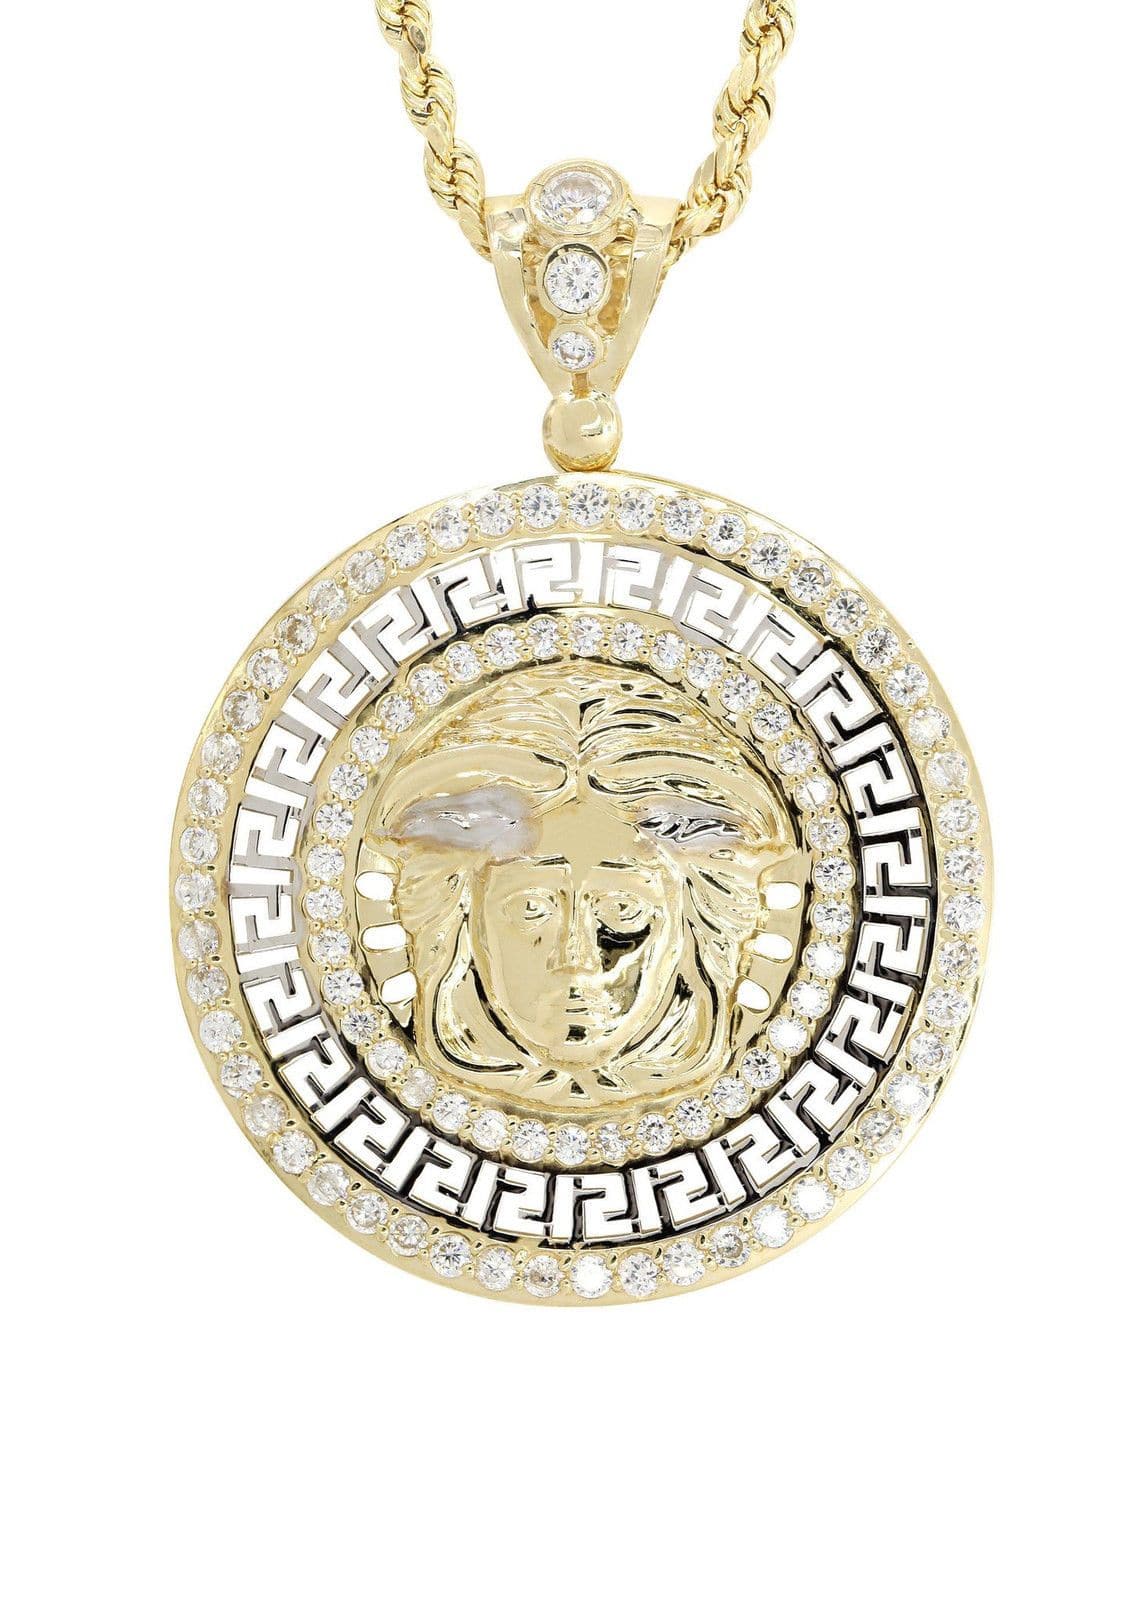 10K Yellow Gold Rope Chain & Versace Style Pendant | Appx. 14.4 Grams ...